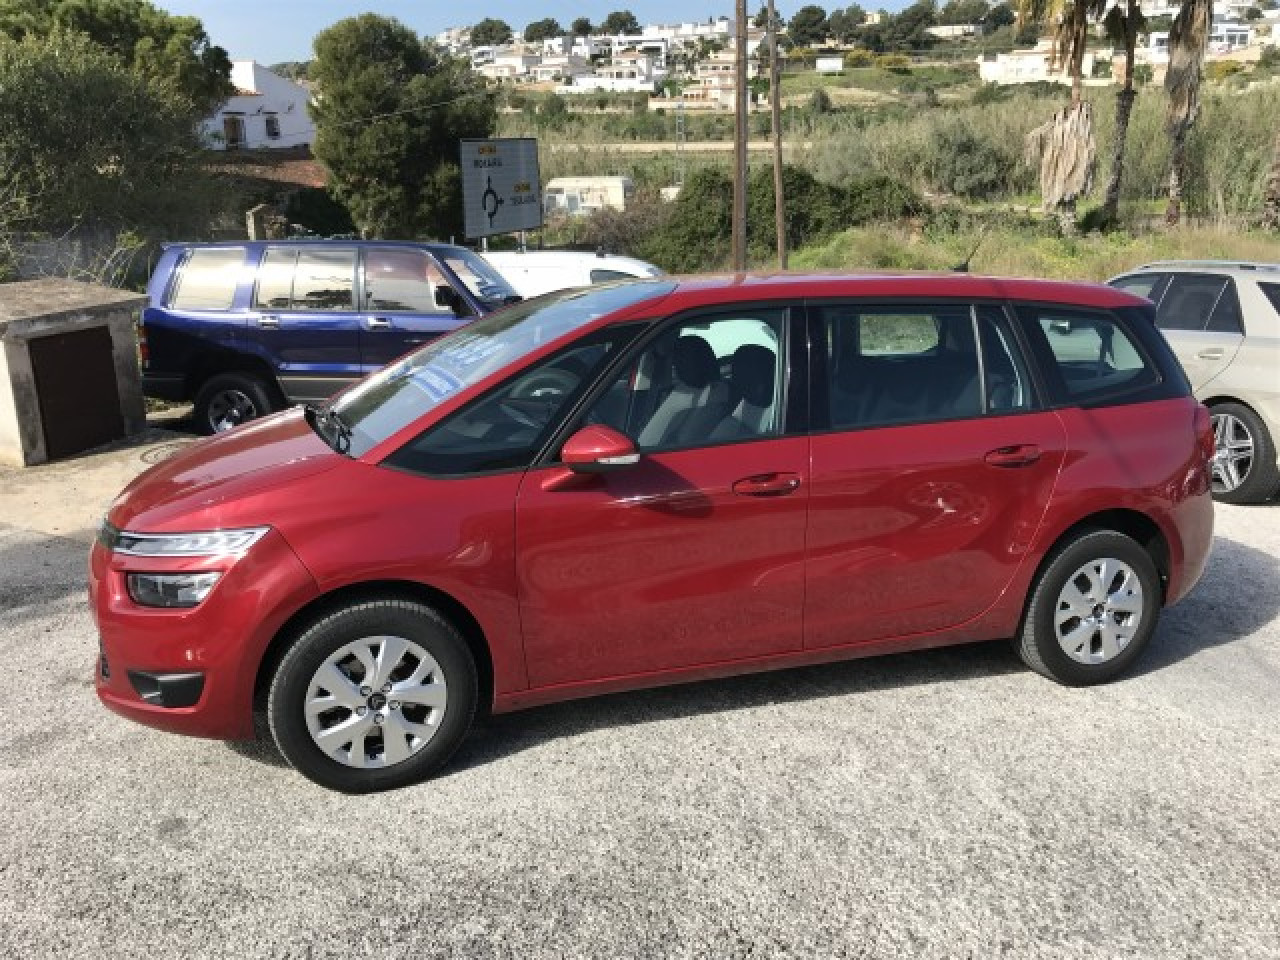 Citroen Grand C4 Picasso 1.6 E Hdi Automatic People carrier 2014 